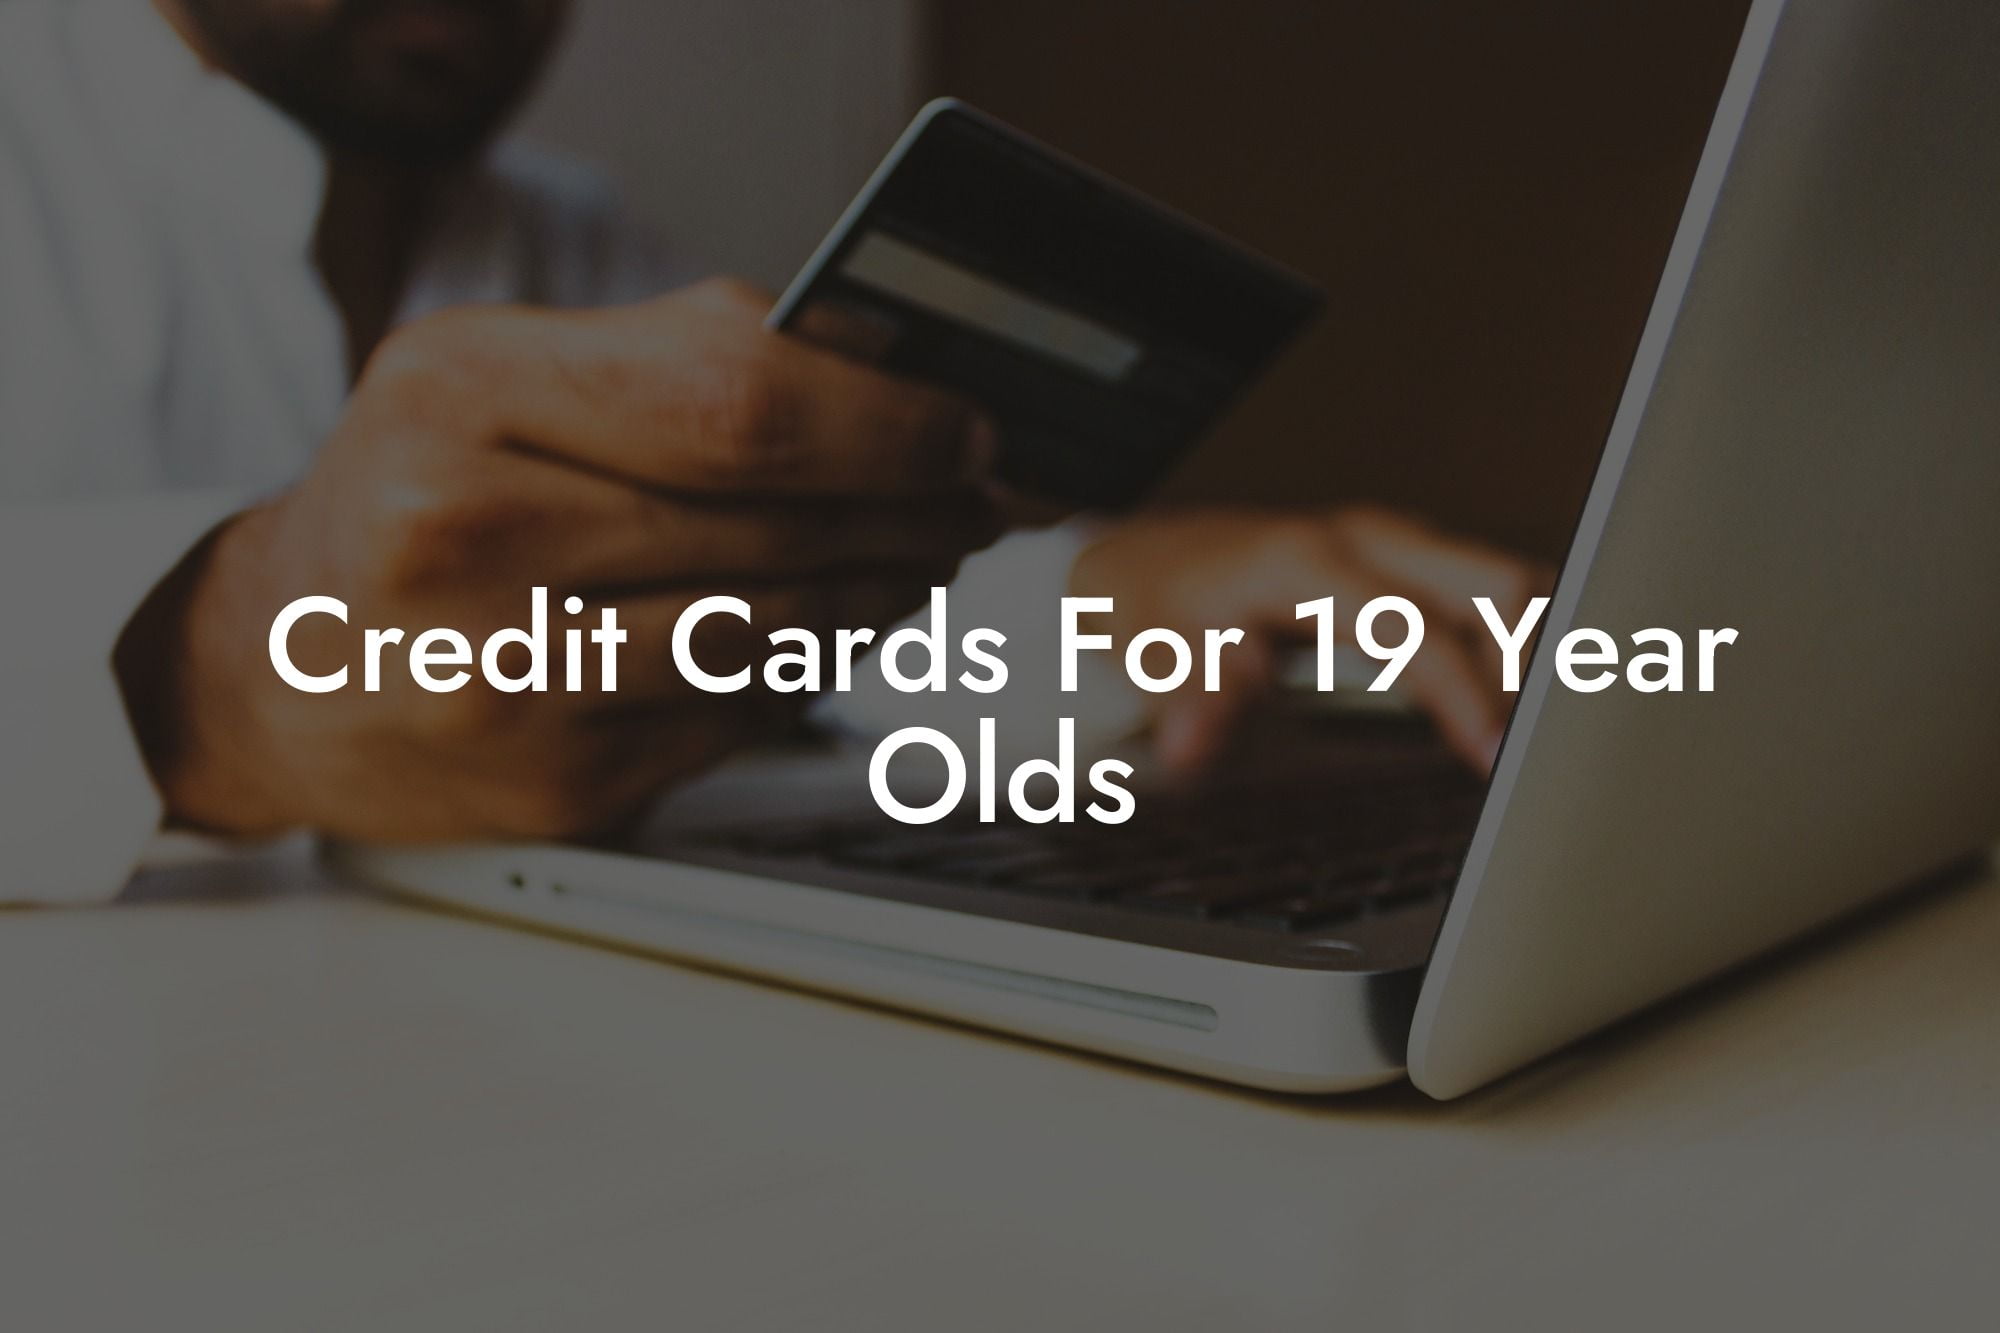 Credit Cards For 19 Year Olds